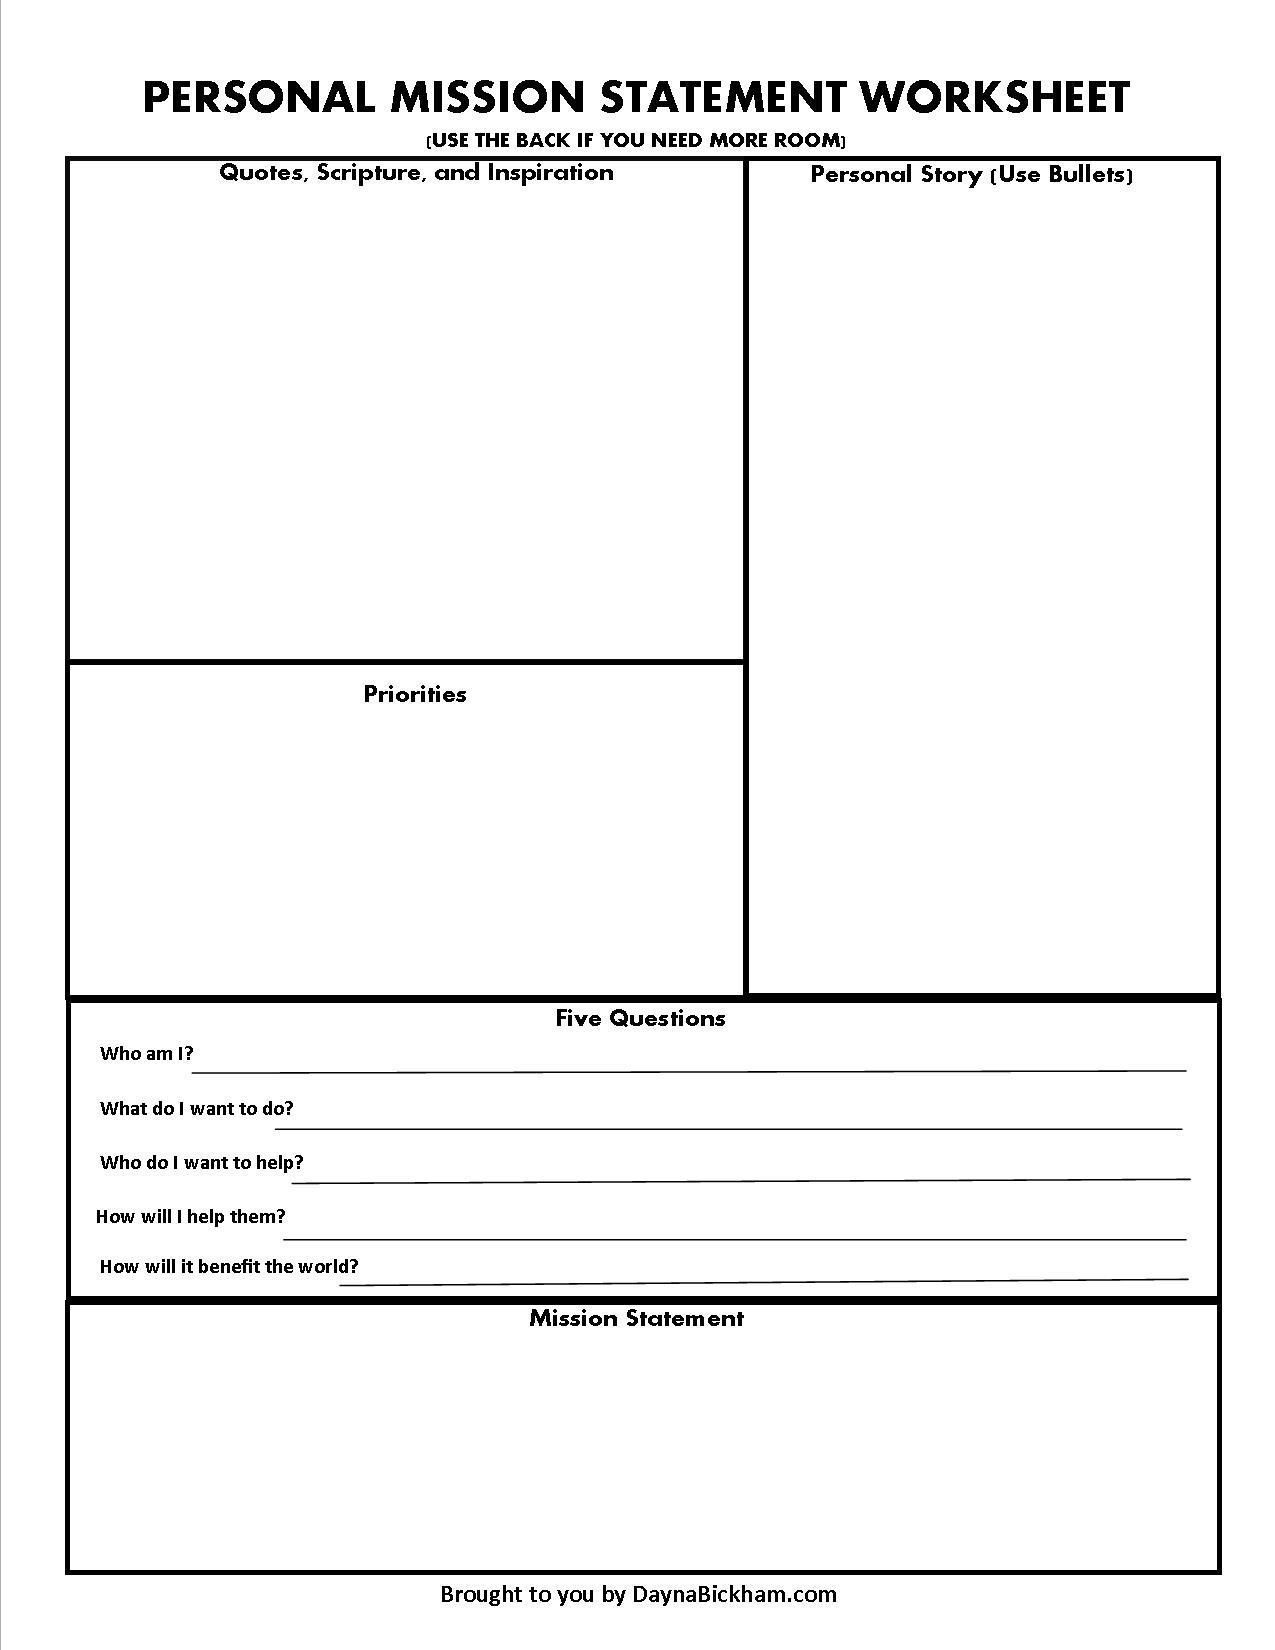 7 Habits Worksheet Pdf Use This Free Able Worksheet to Write Your Personal